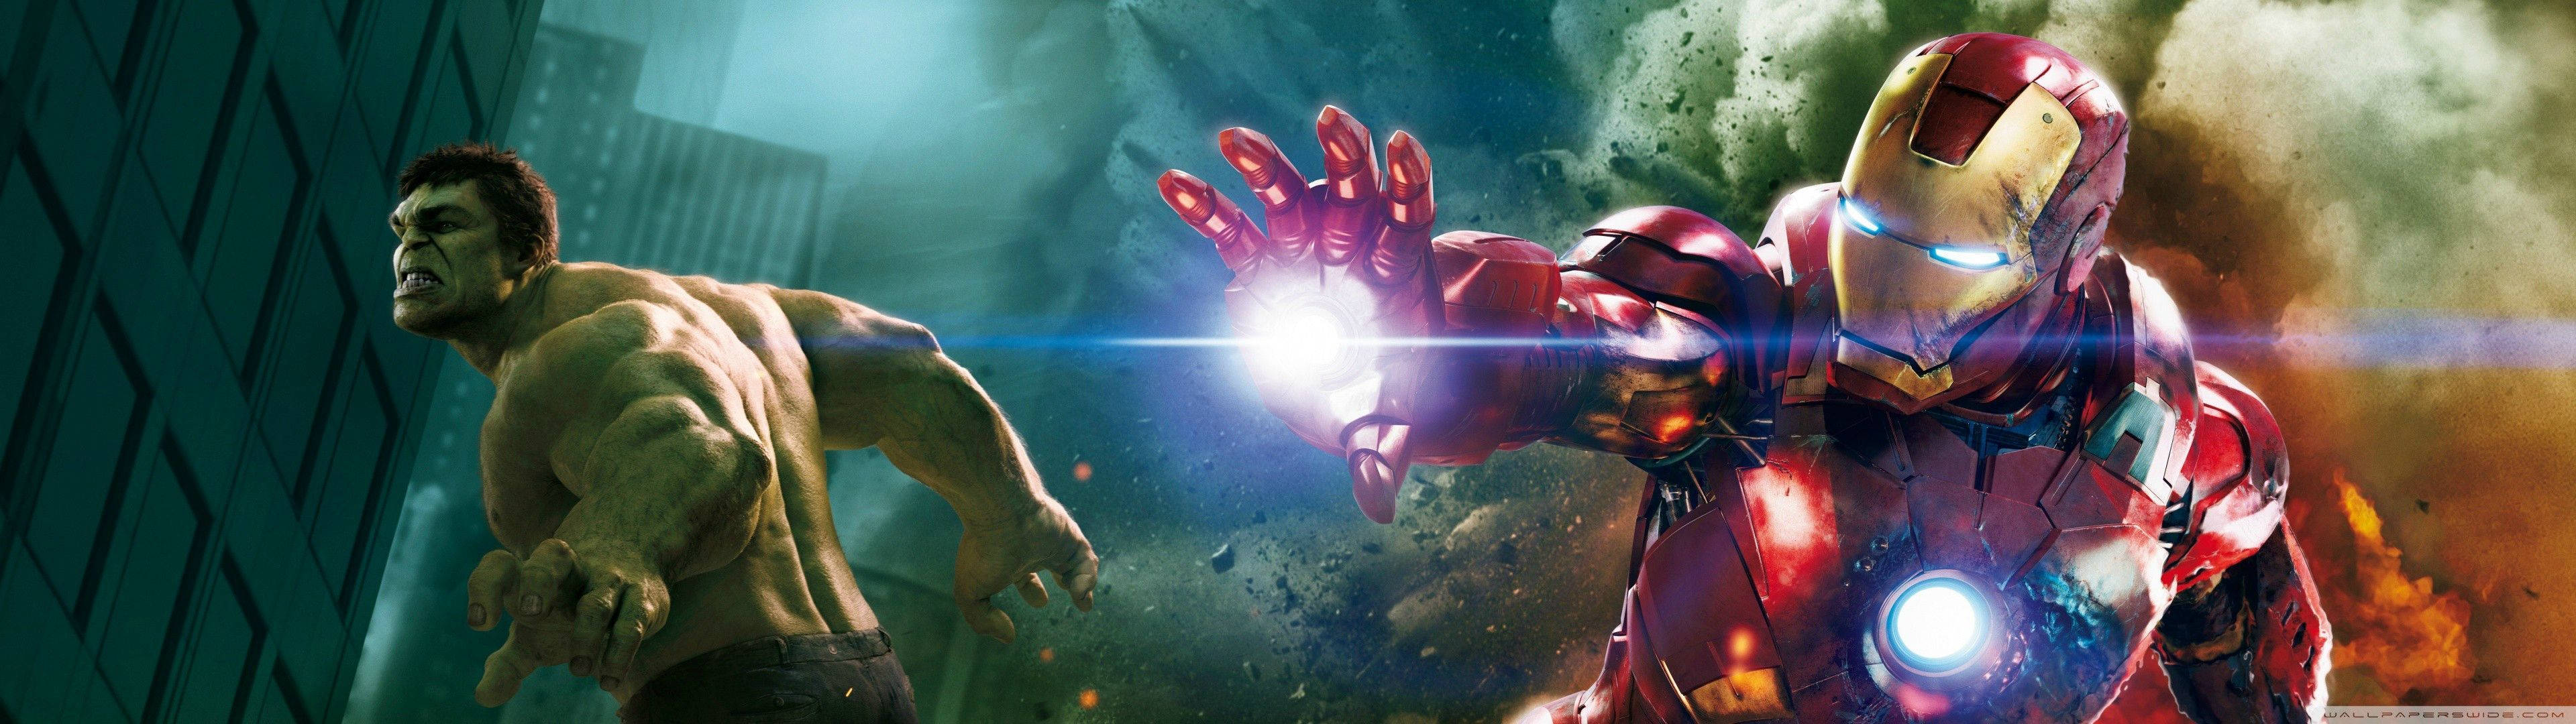 Hulk and Iron Man team up for an epic Team Up in Marvel's Dual Screen. Wallpaper